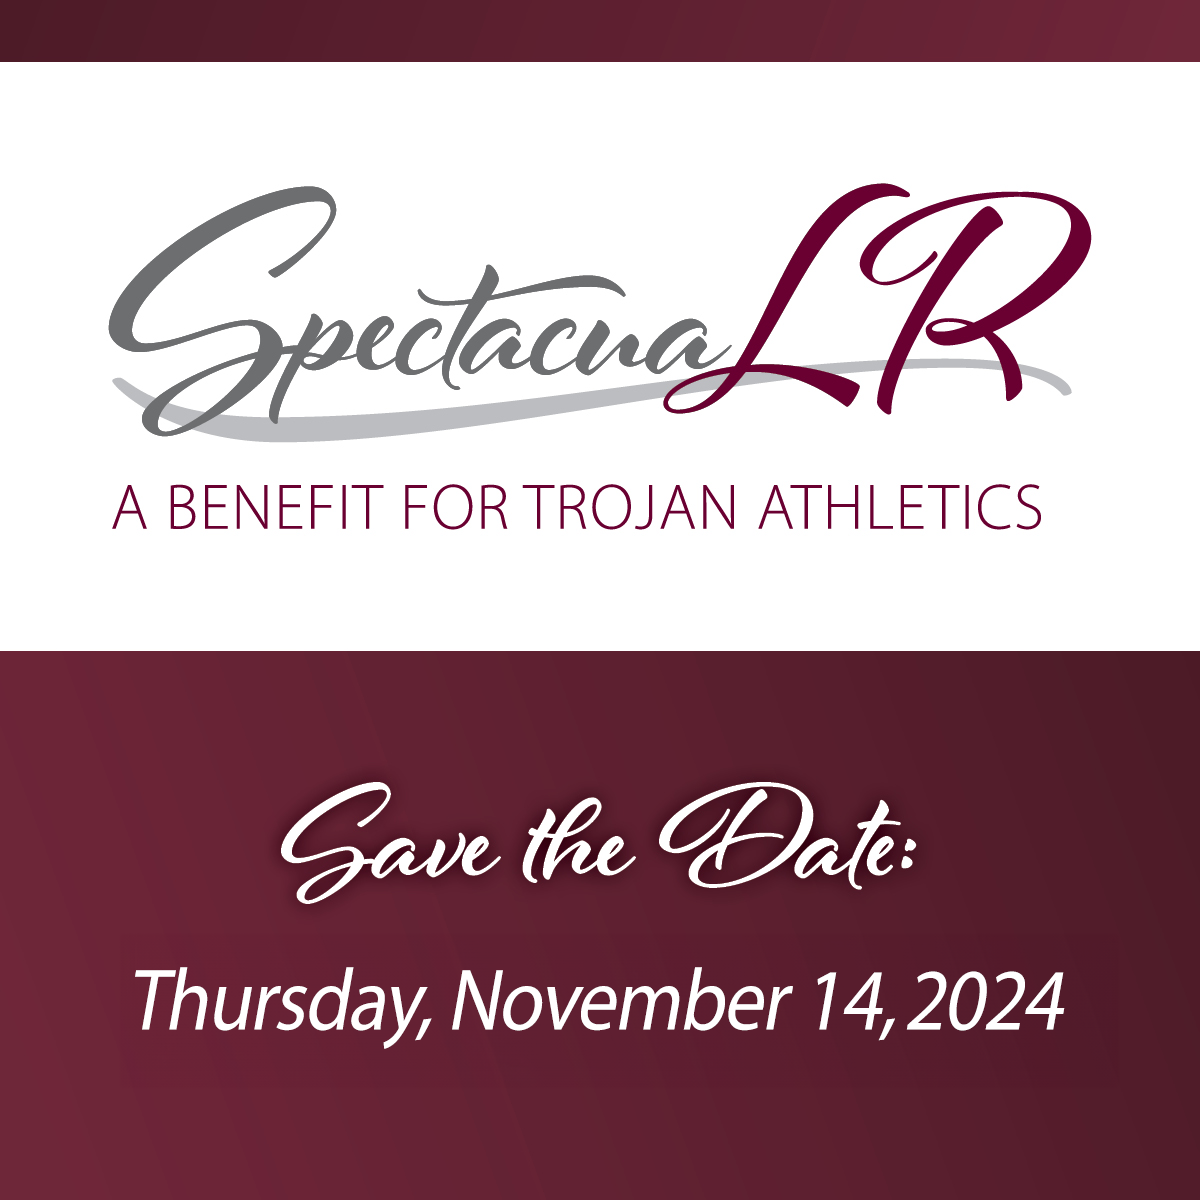 The Little Rock Department of Athletics is thrilled to announce that this year's highly anticipated 16th edition of its SpectacuaLR Gala will take place on Thursday, Nov. 14, at the Jack Stephens Center.